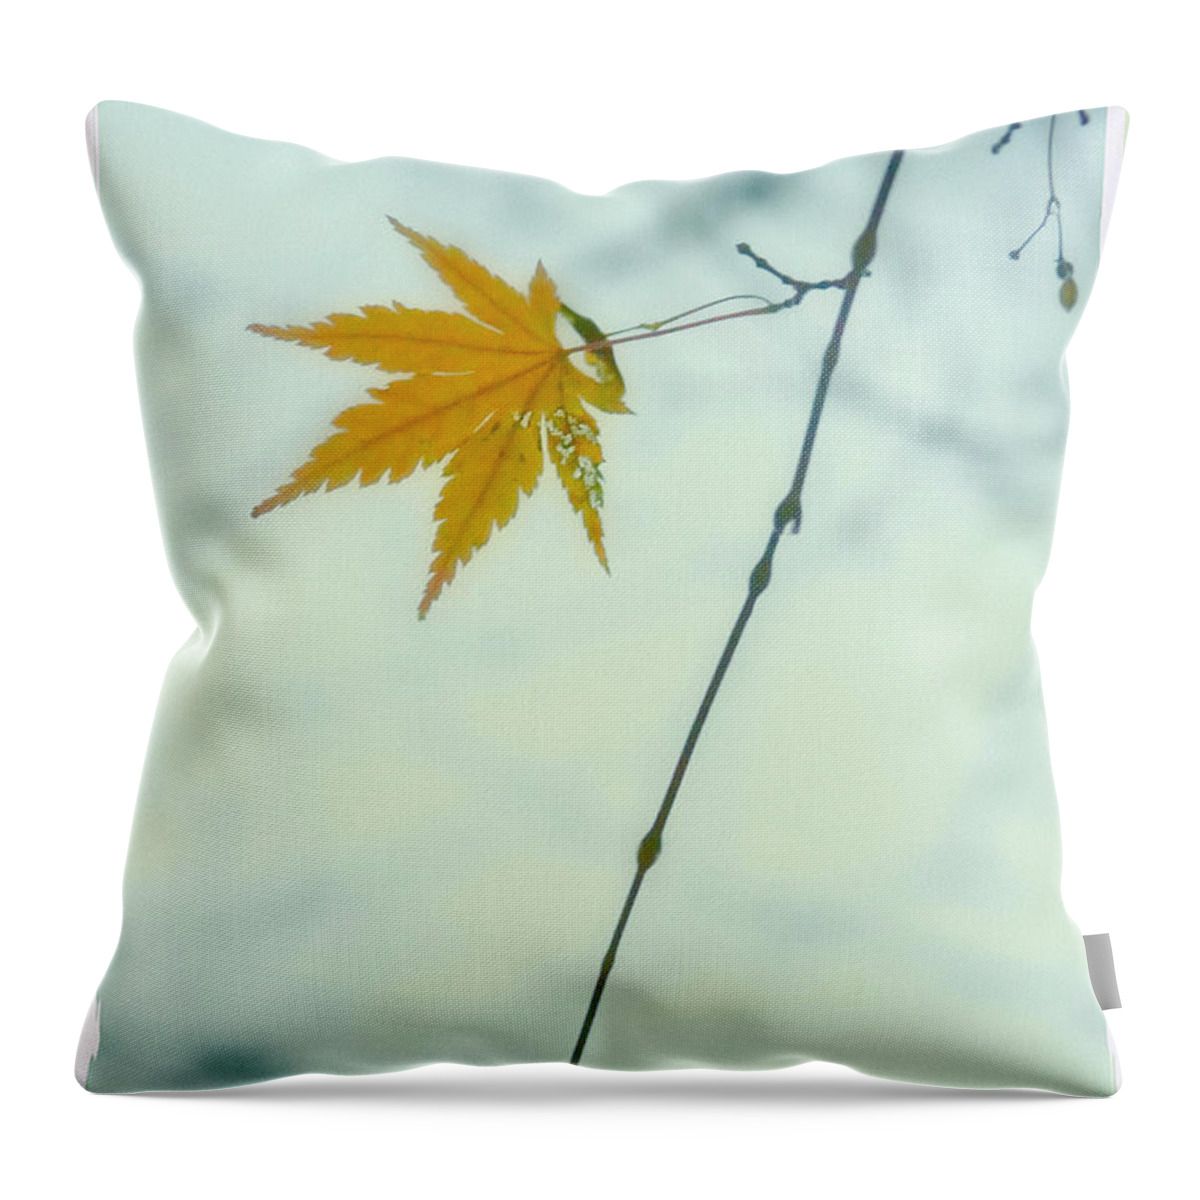 Fall Throw Pillow featuring the photograph A Single Leaf by Jonathan Nguyen